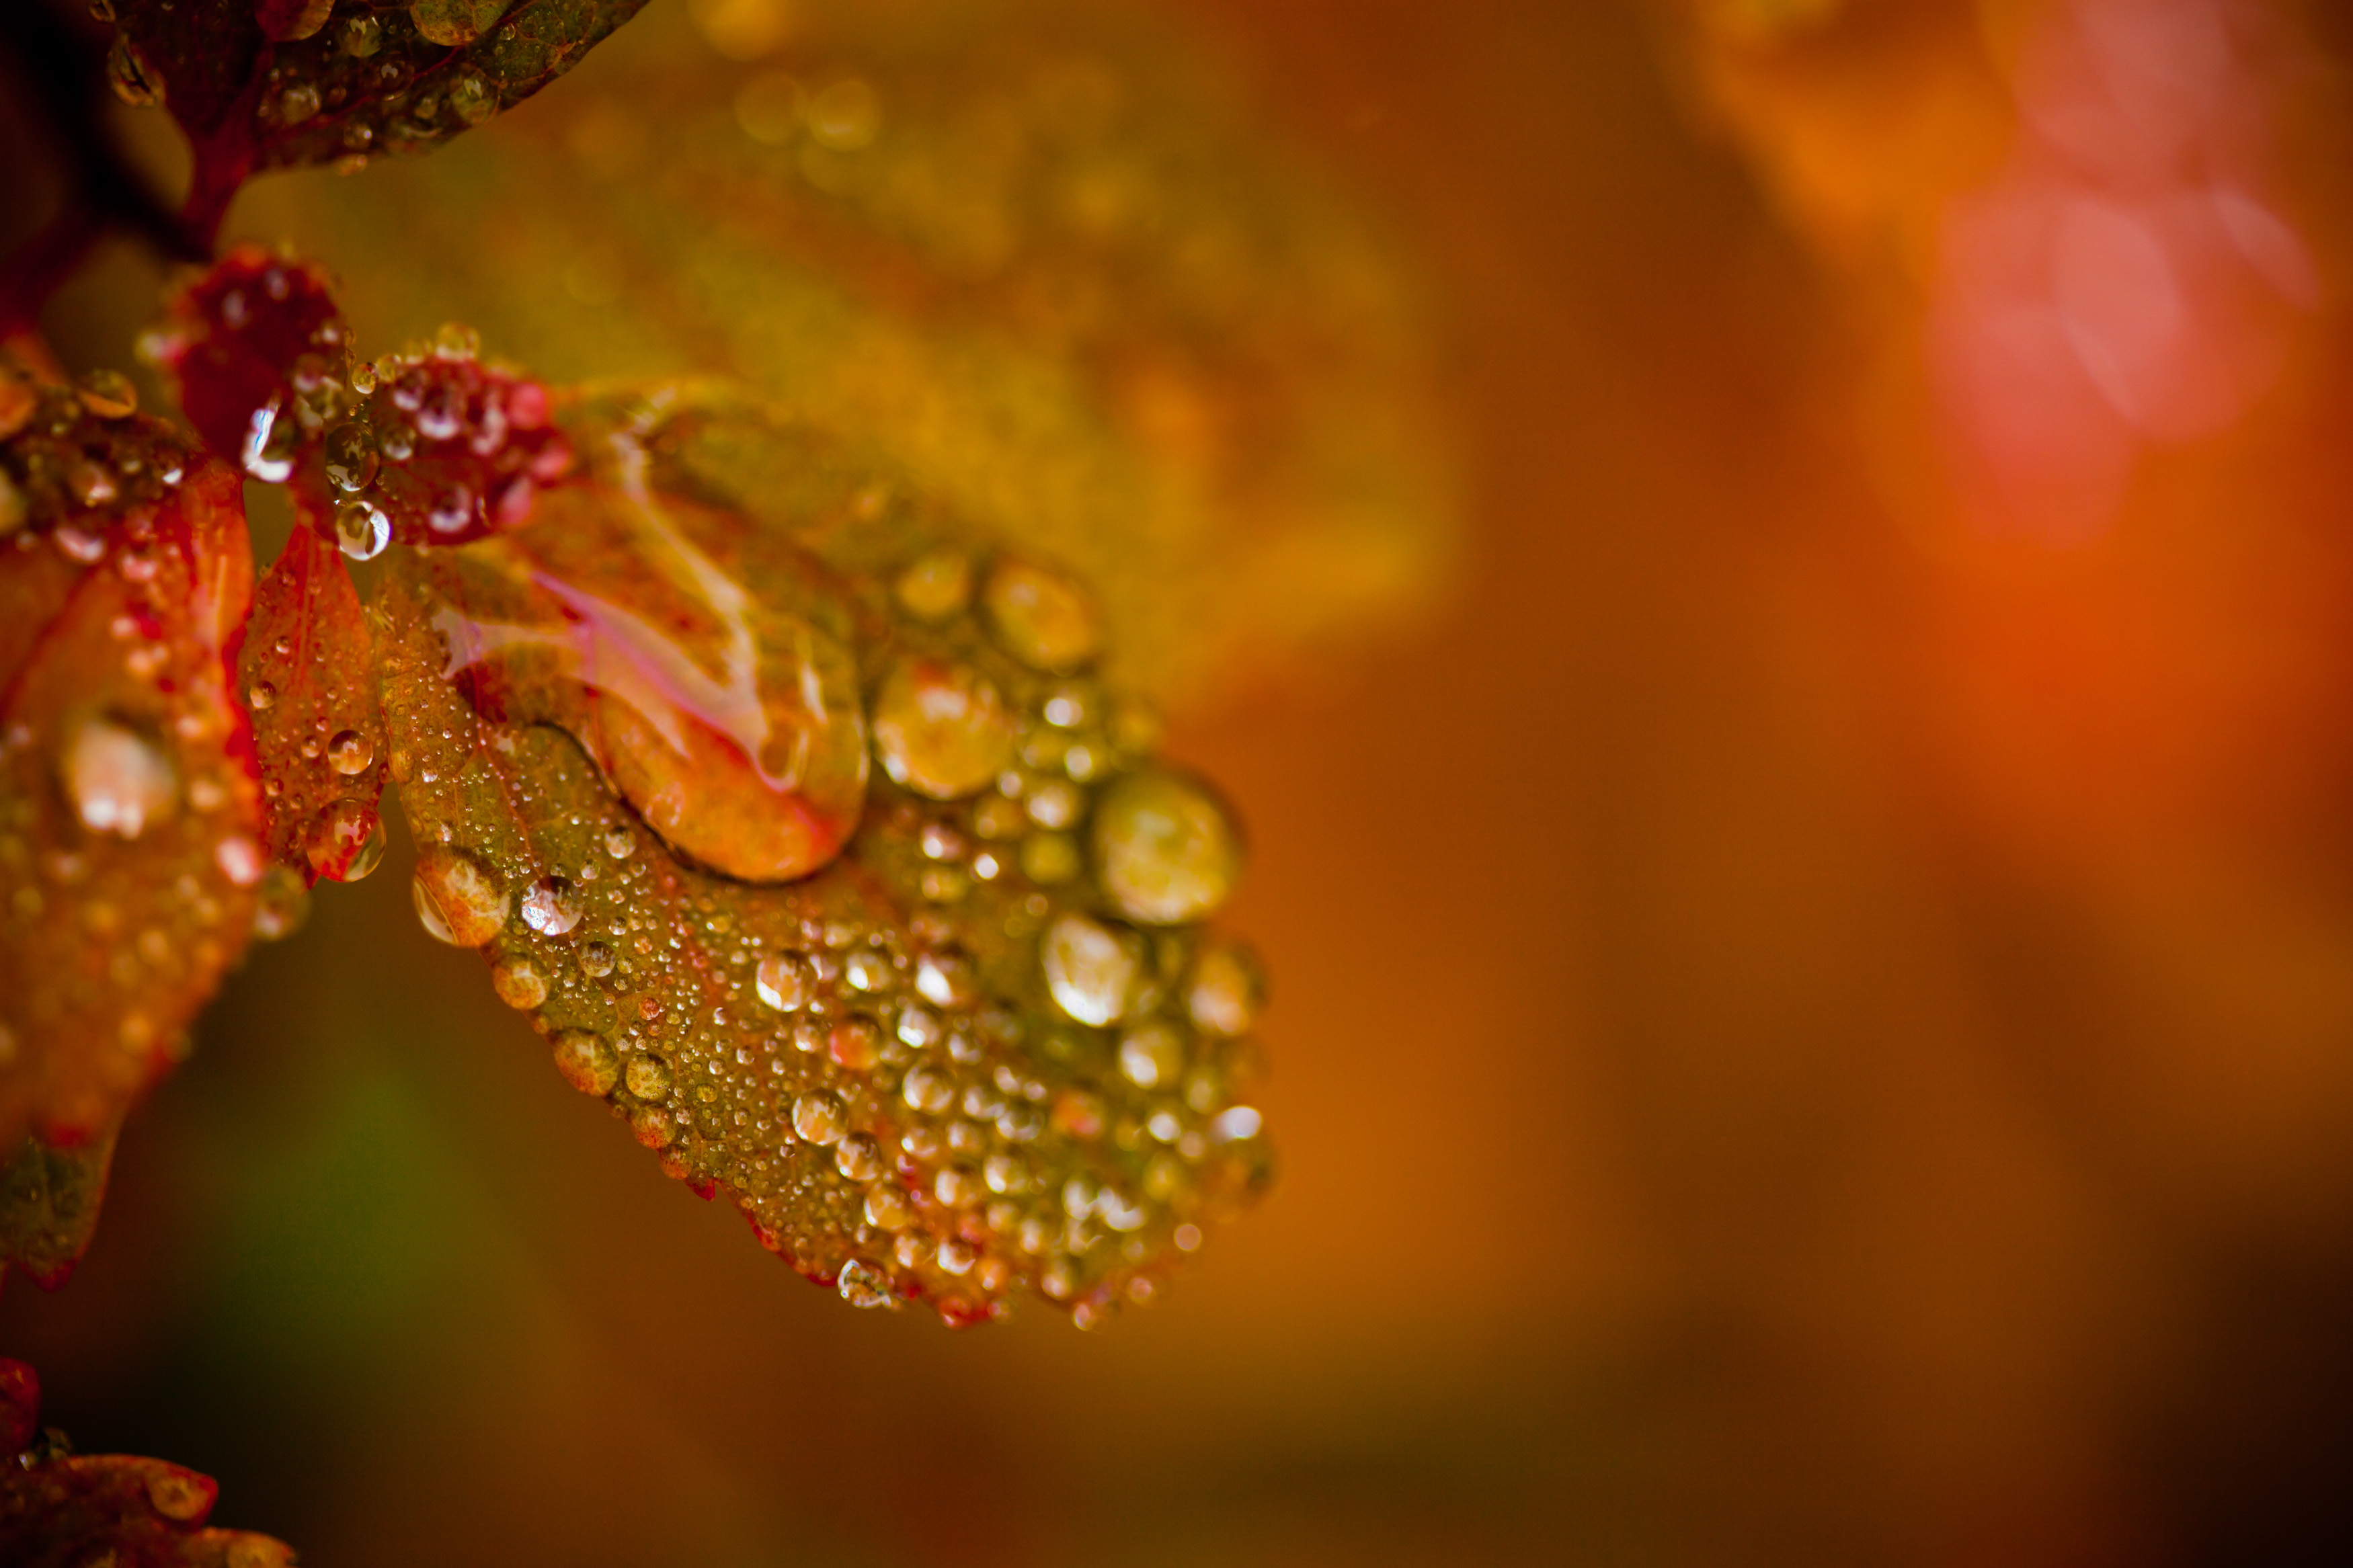 Autumn foliage with droplets photo